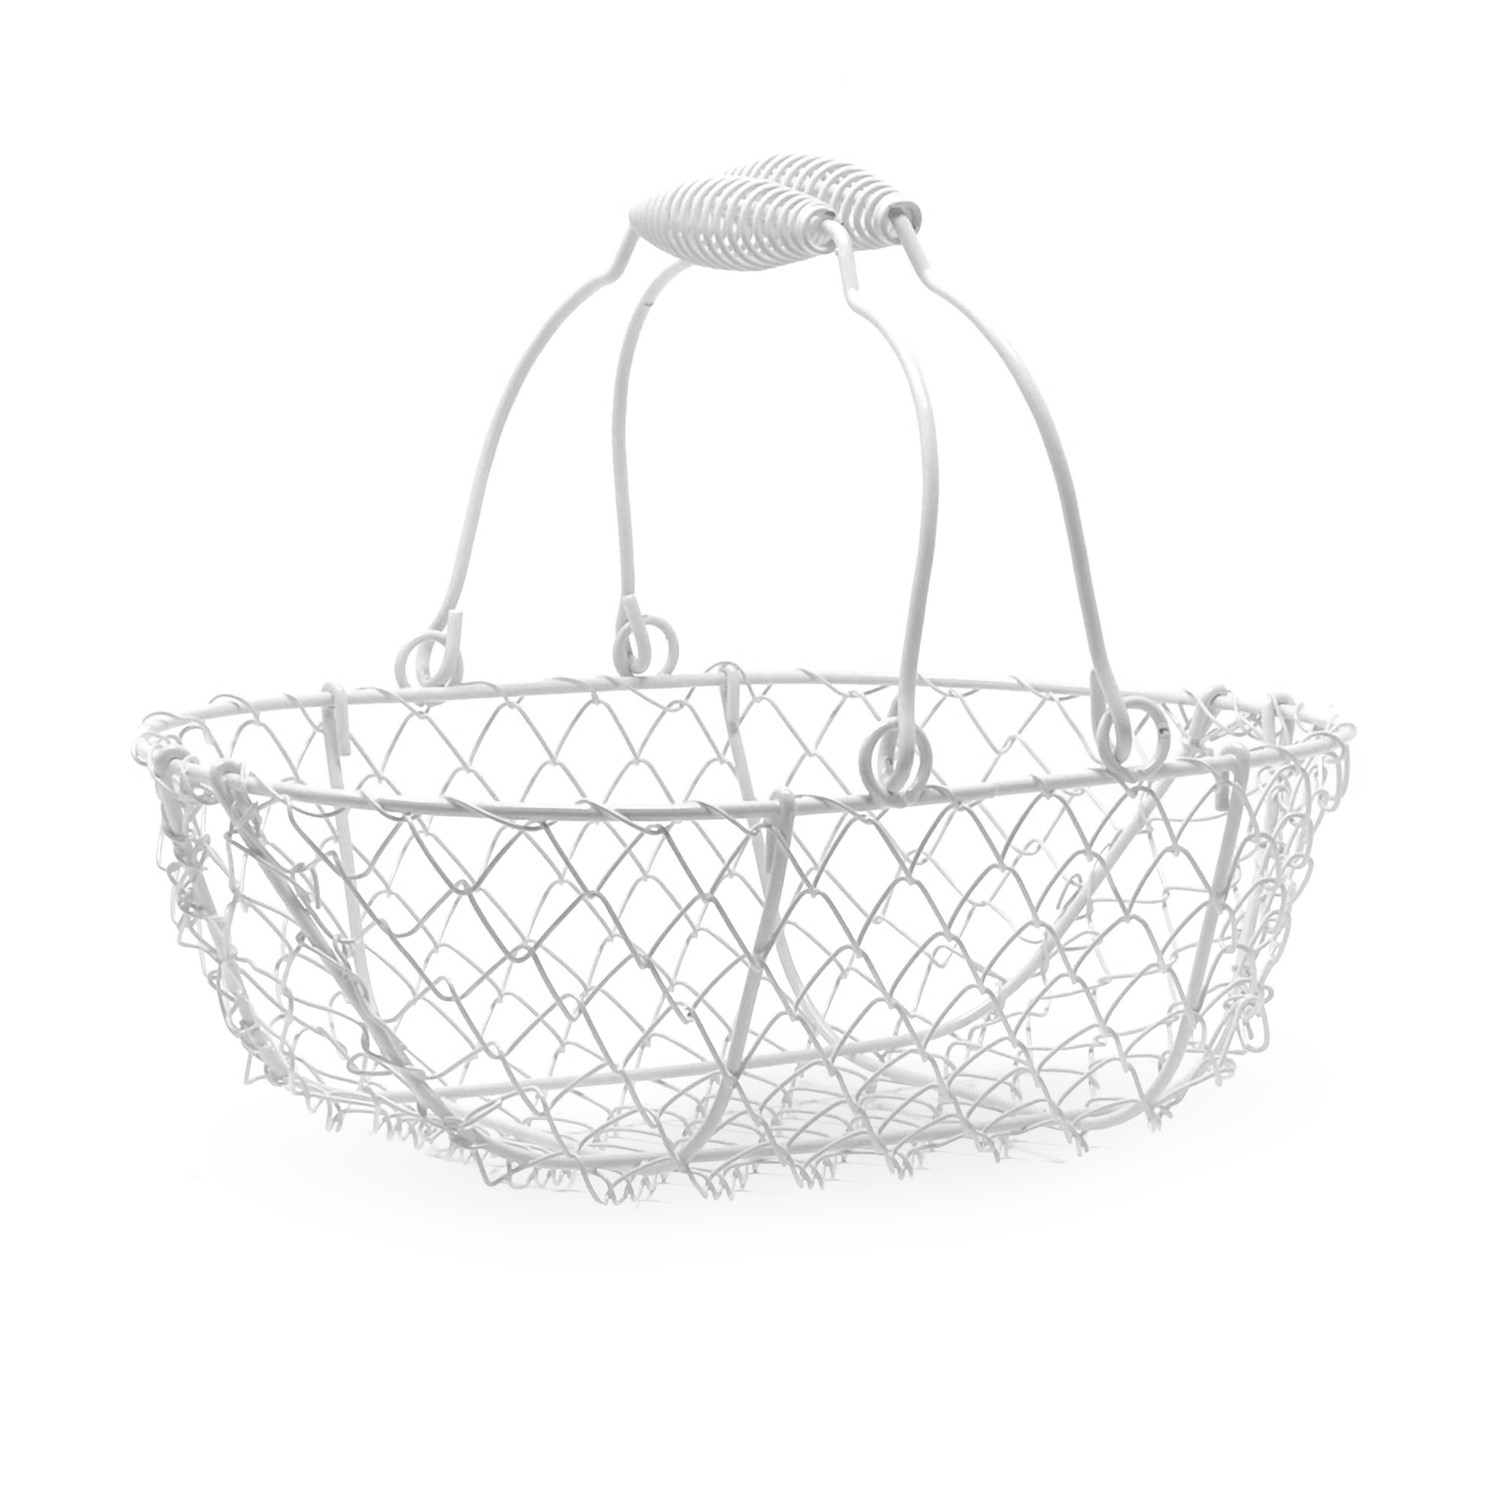 The Lucky Clover Trading 5205BLK Oblong Wire Swing Handle Basket Black